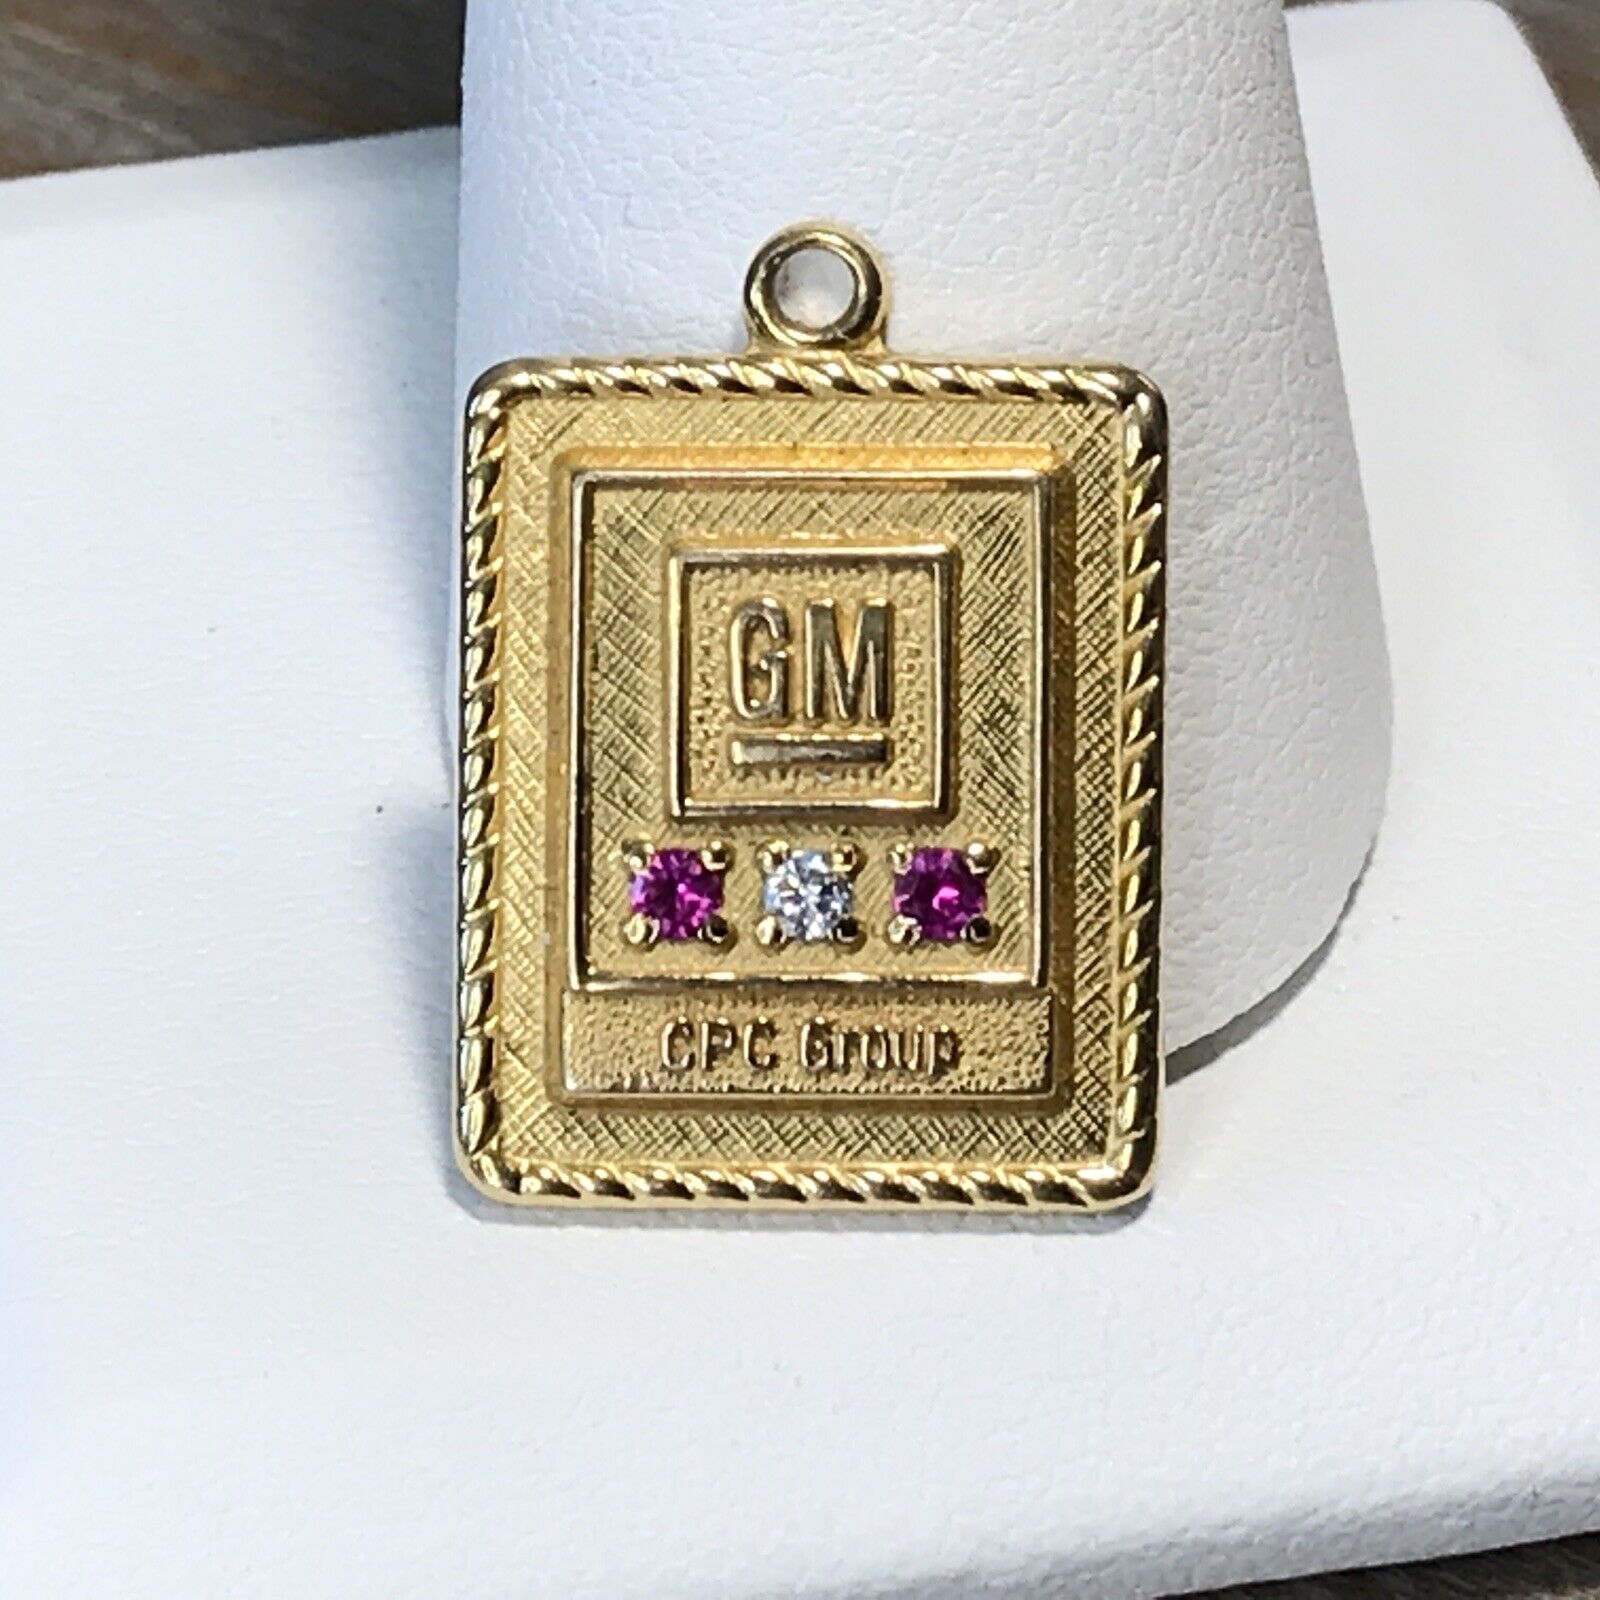 GM 1/10 10K GOLD SERVICE Pendant WITH TWO RUBY STONES ONE DIAMOND